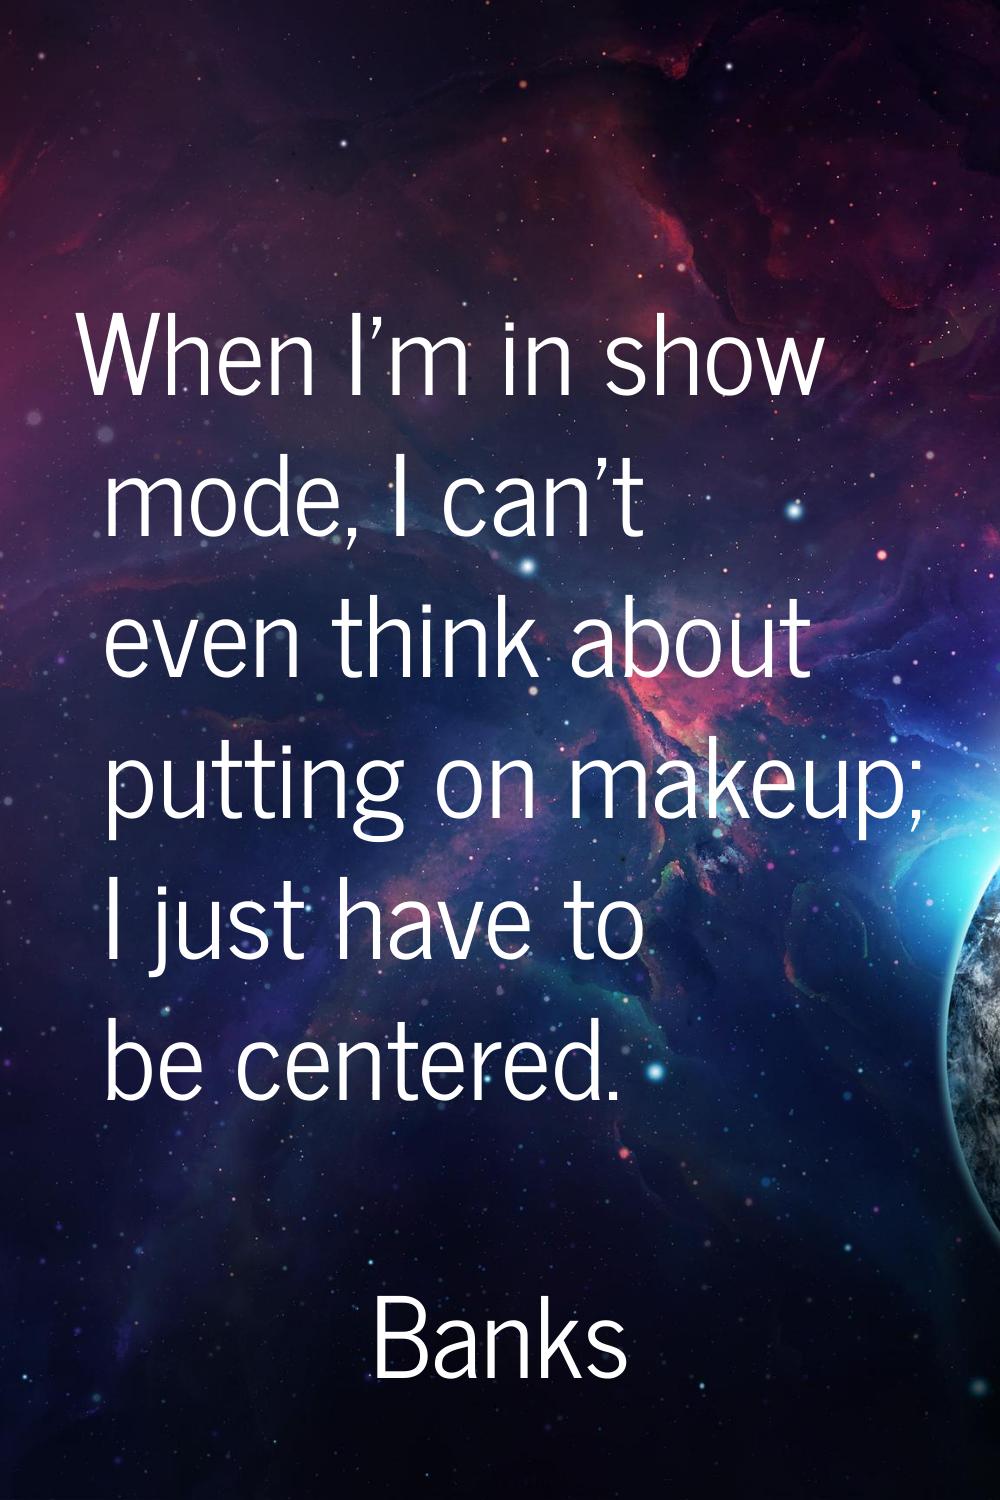 When I'm in show mode, I can't even think about putting on makeup; I just have to be centered.